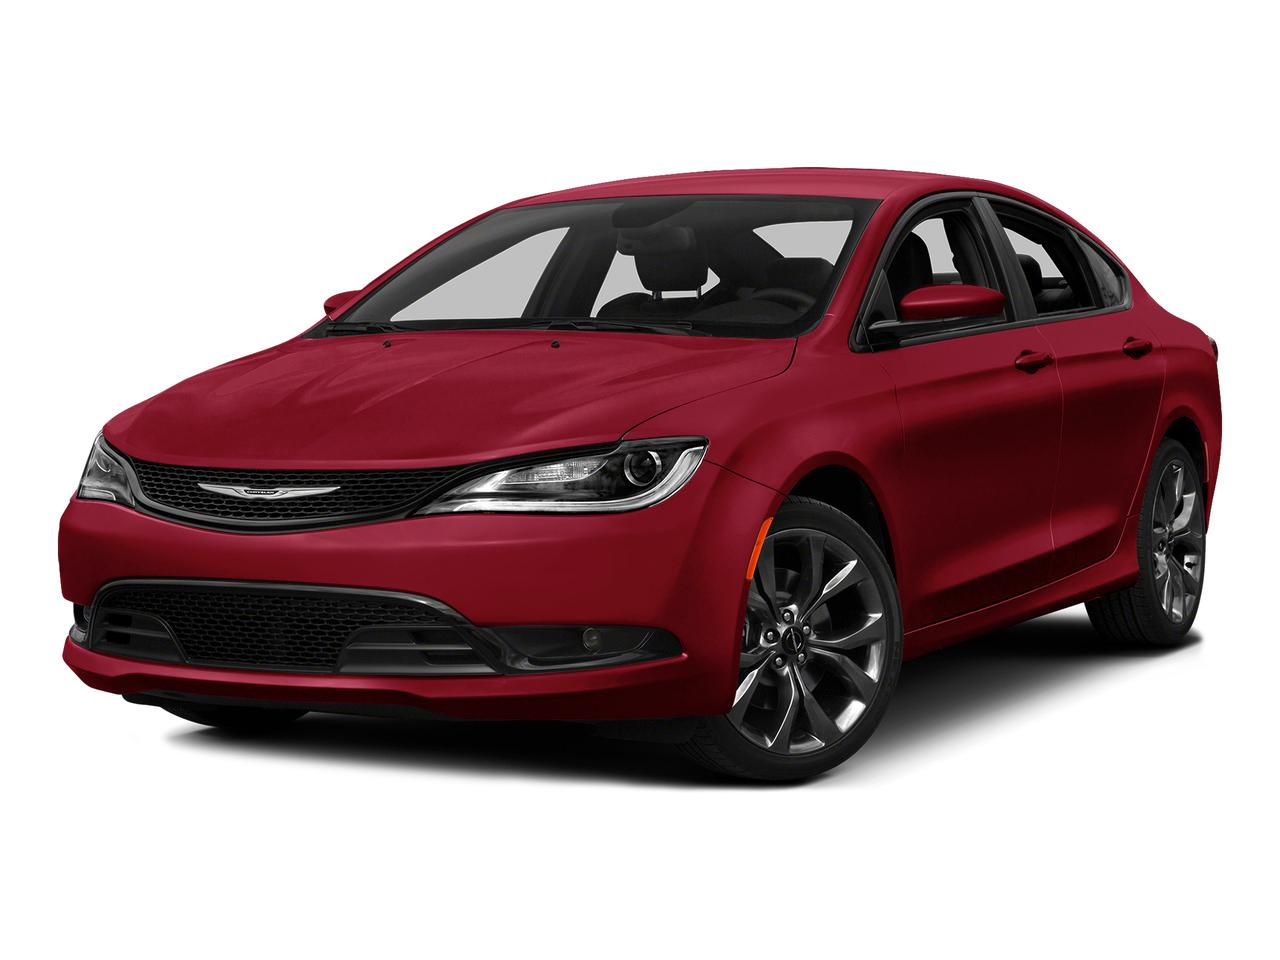 2015 Chrysler 200 Vehicle Photo in SOUTH PORTLAND, ME 04106-1997